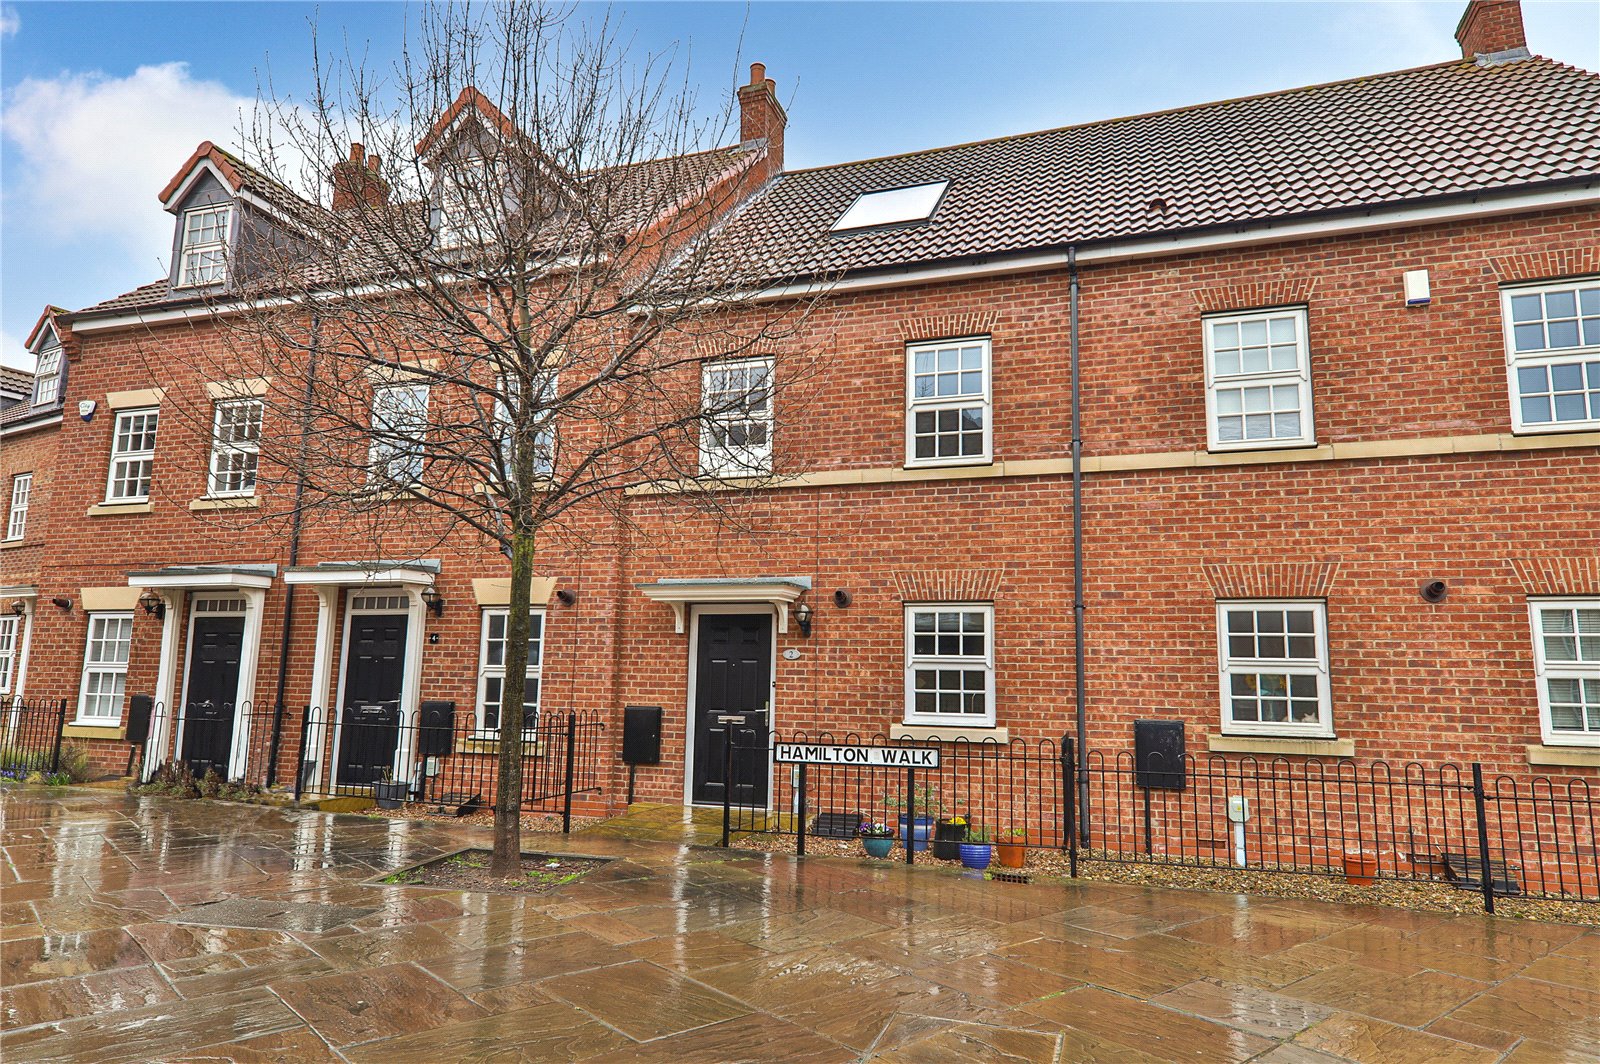 3 bed house for sale in Hamilton Walk, Beverley  - Property Image 1